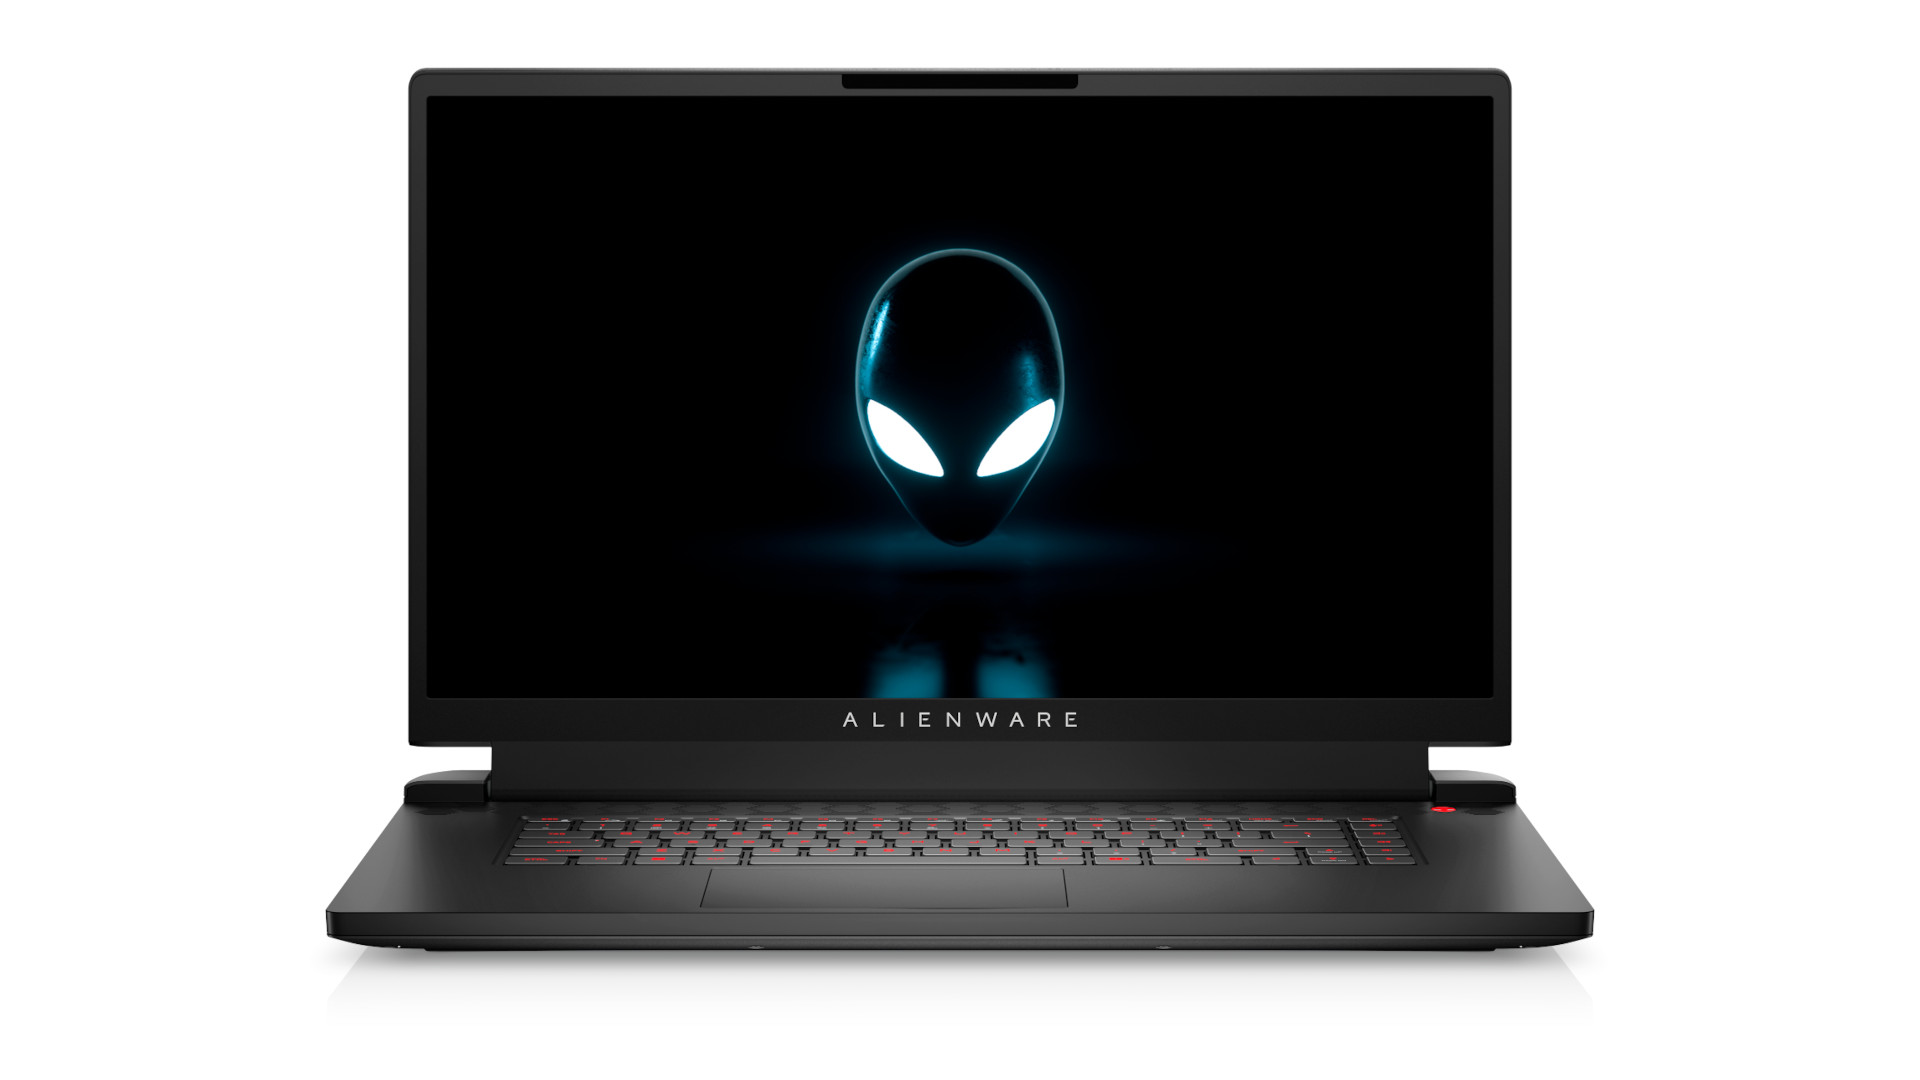 The best AMD gaming laptop is the Alienware M17 R5